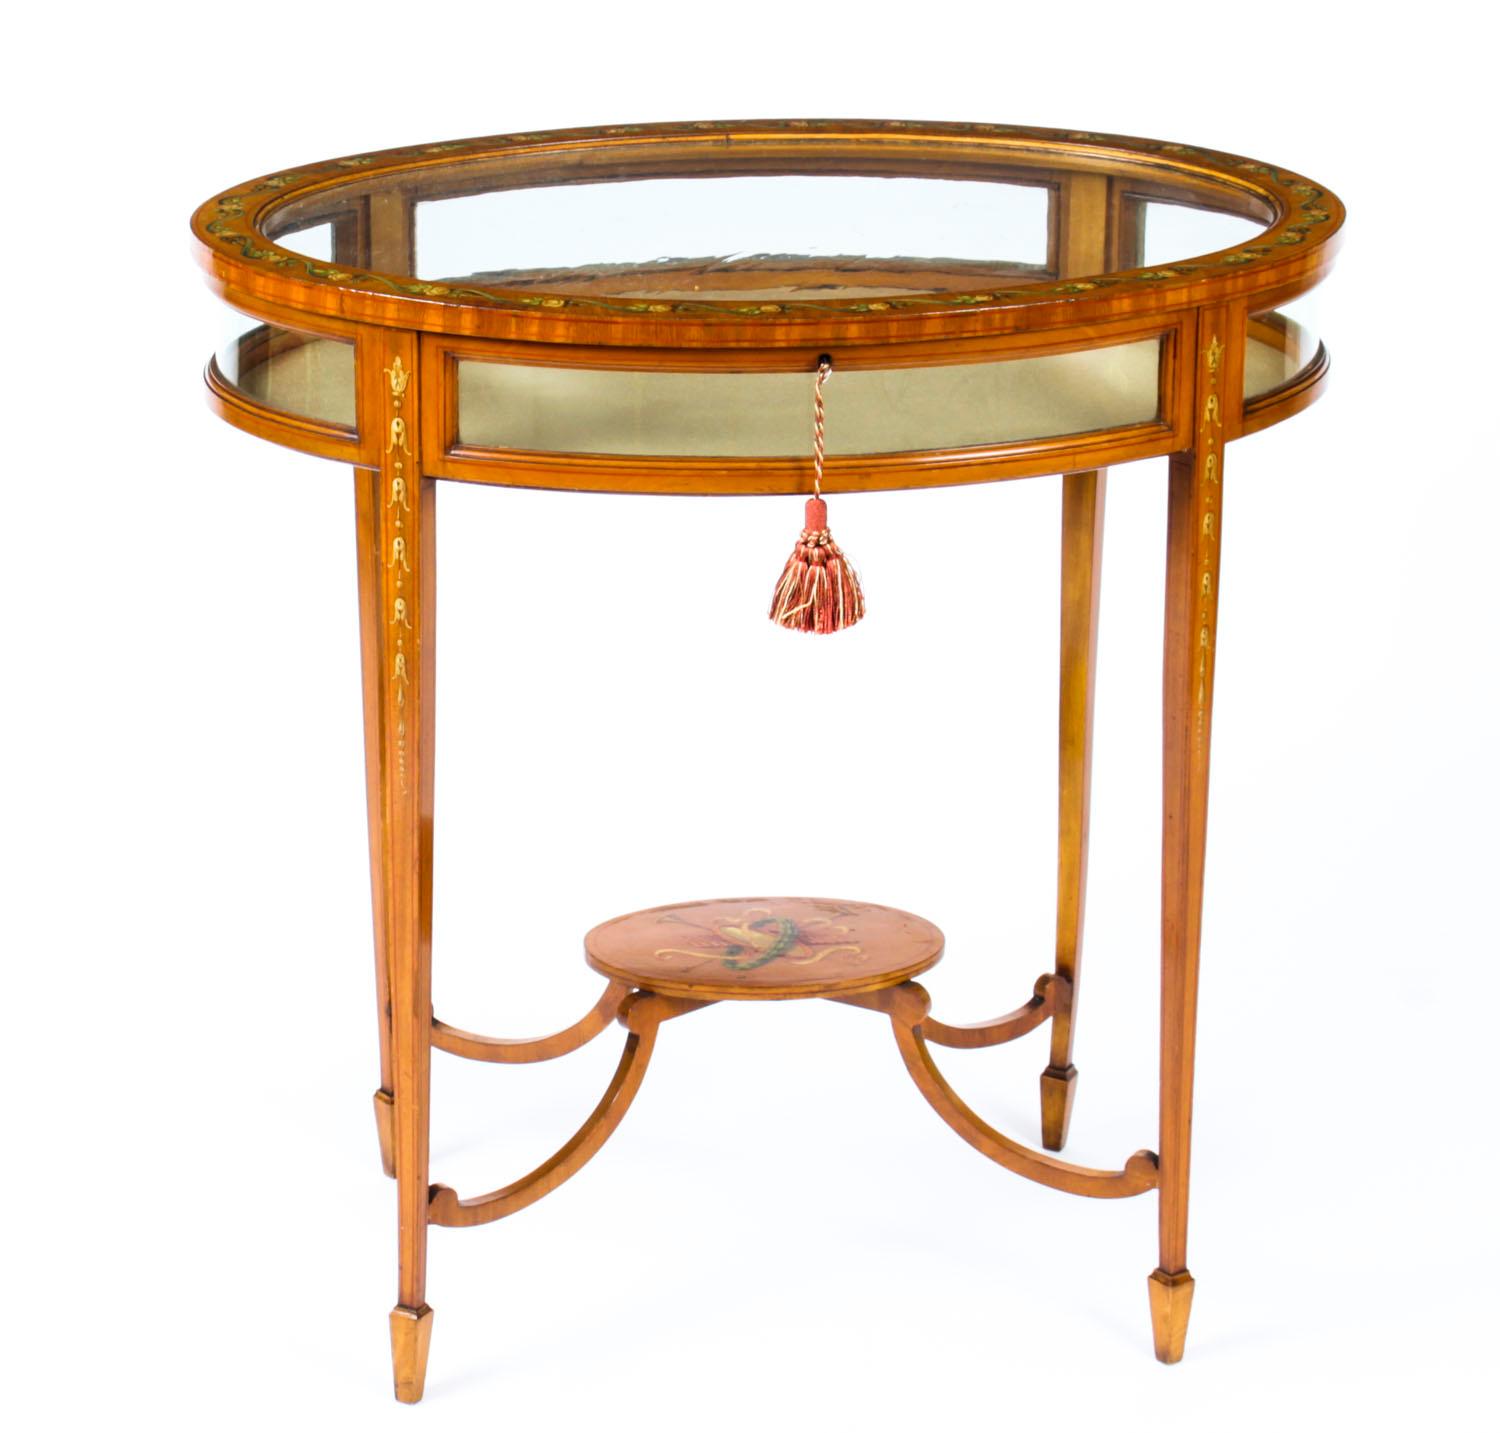 This is a truly beautiful antique Edwardian Satinwood bijouterie display table circa 1900 in date.
 
The oval shaped display table has a hinged glazed lid decorate and it is raised on square tapering legs joined by an oval under-tier decorated with